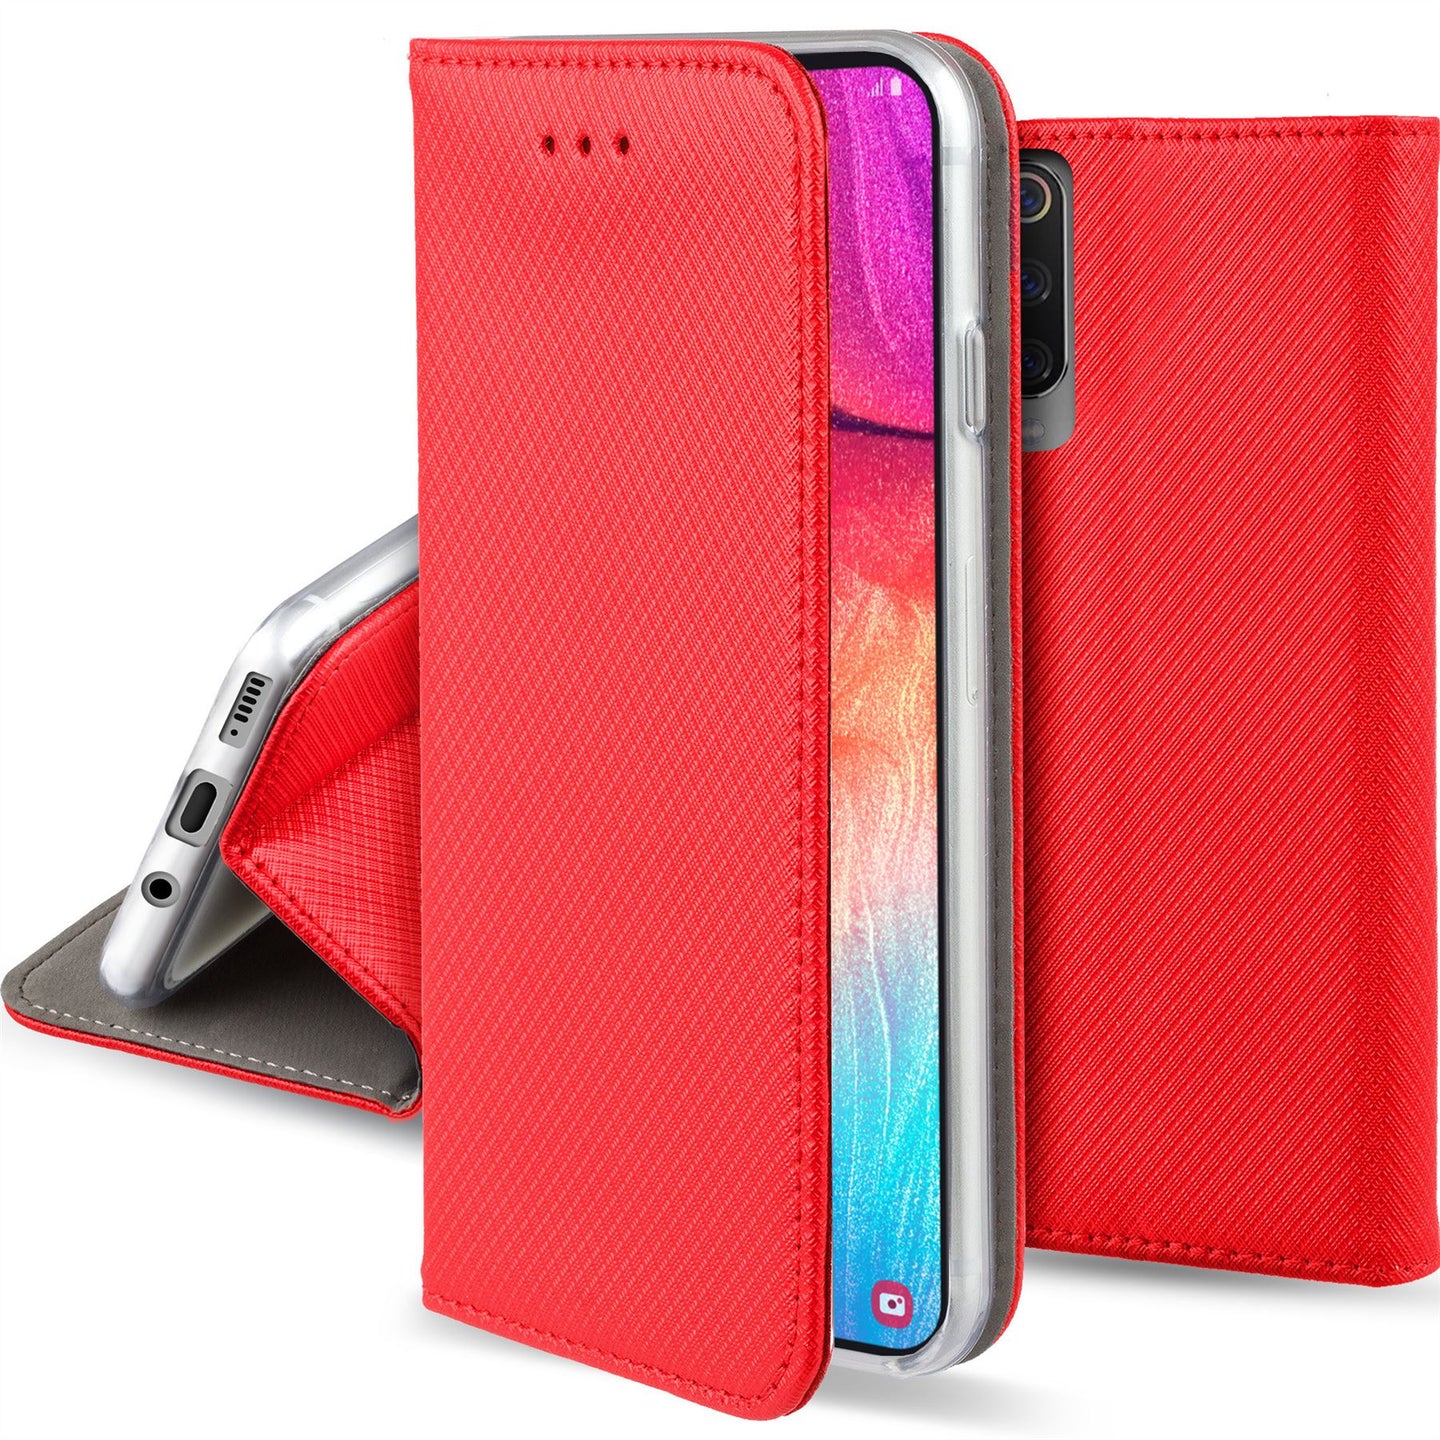 Moozy Case Flip Cover for Samsung A50, Red - Smart Magnetic Flip Case with Card Holder and Stand